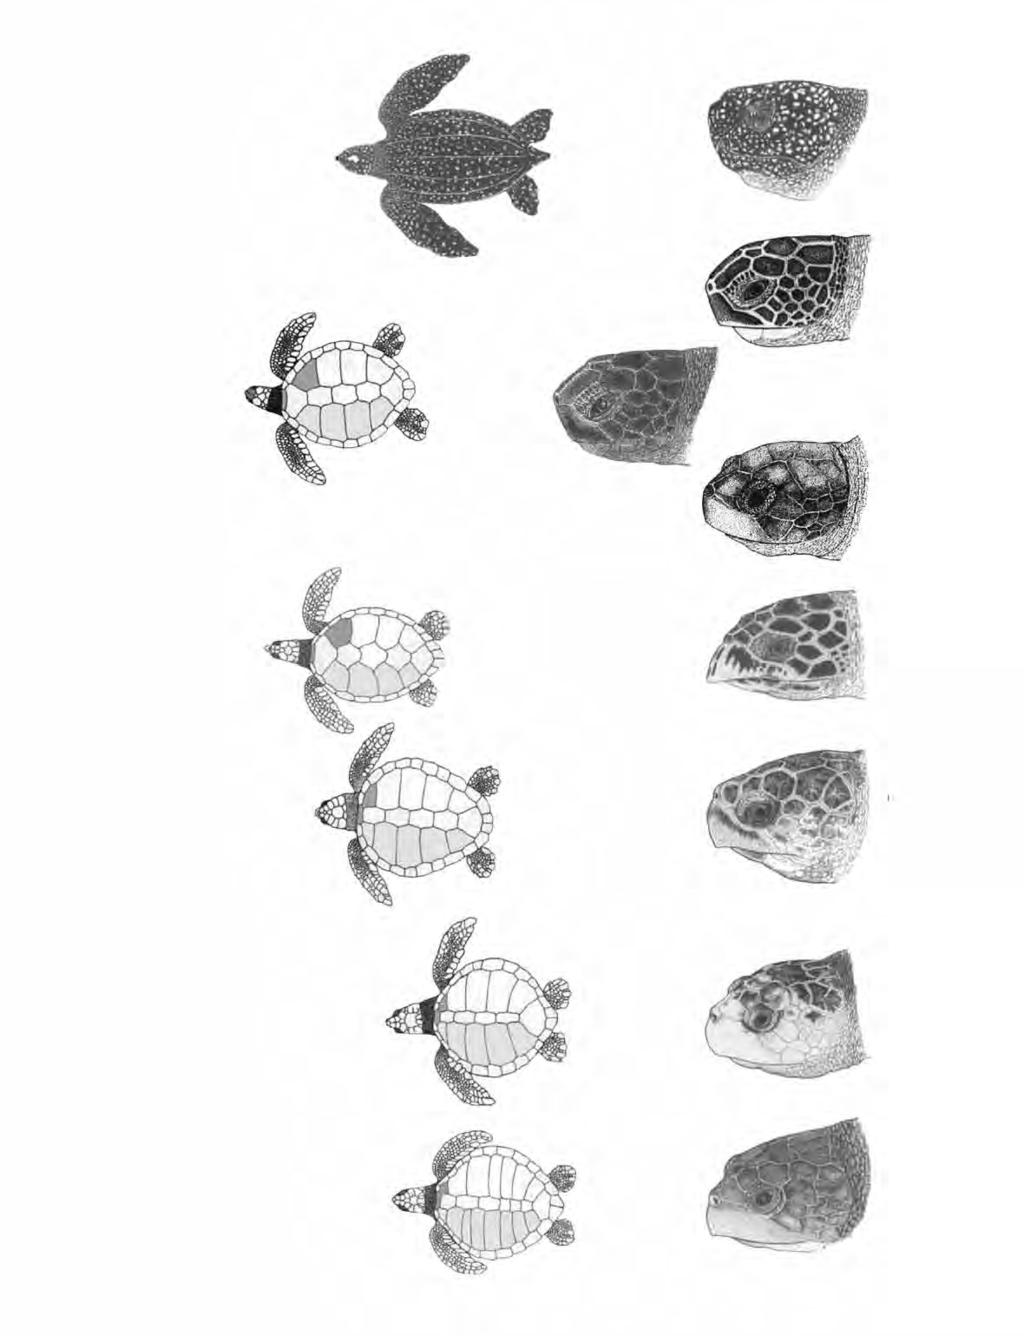 IDENTIFICATION OF SEA TURTLES Hard carapace (shell) with large scutes (shell plates) 5 or more costal (lateral) scutes; first costal scute touches nuchal 4 costal (lateral) scutes; first costal scute